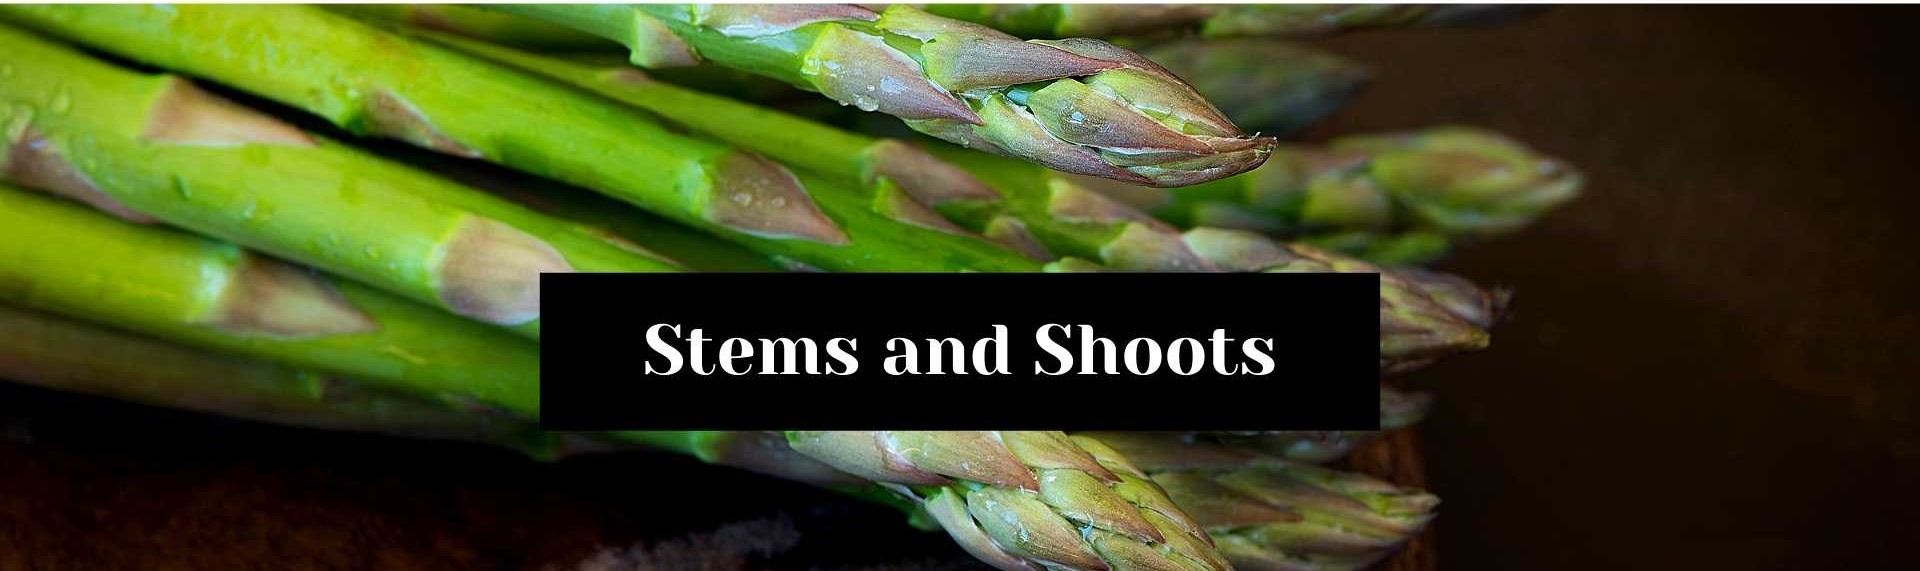 Stems And Shoots - Beyond Fruits Limited